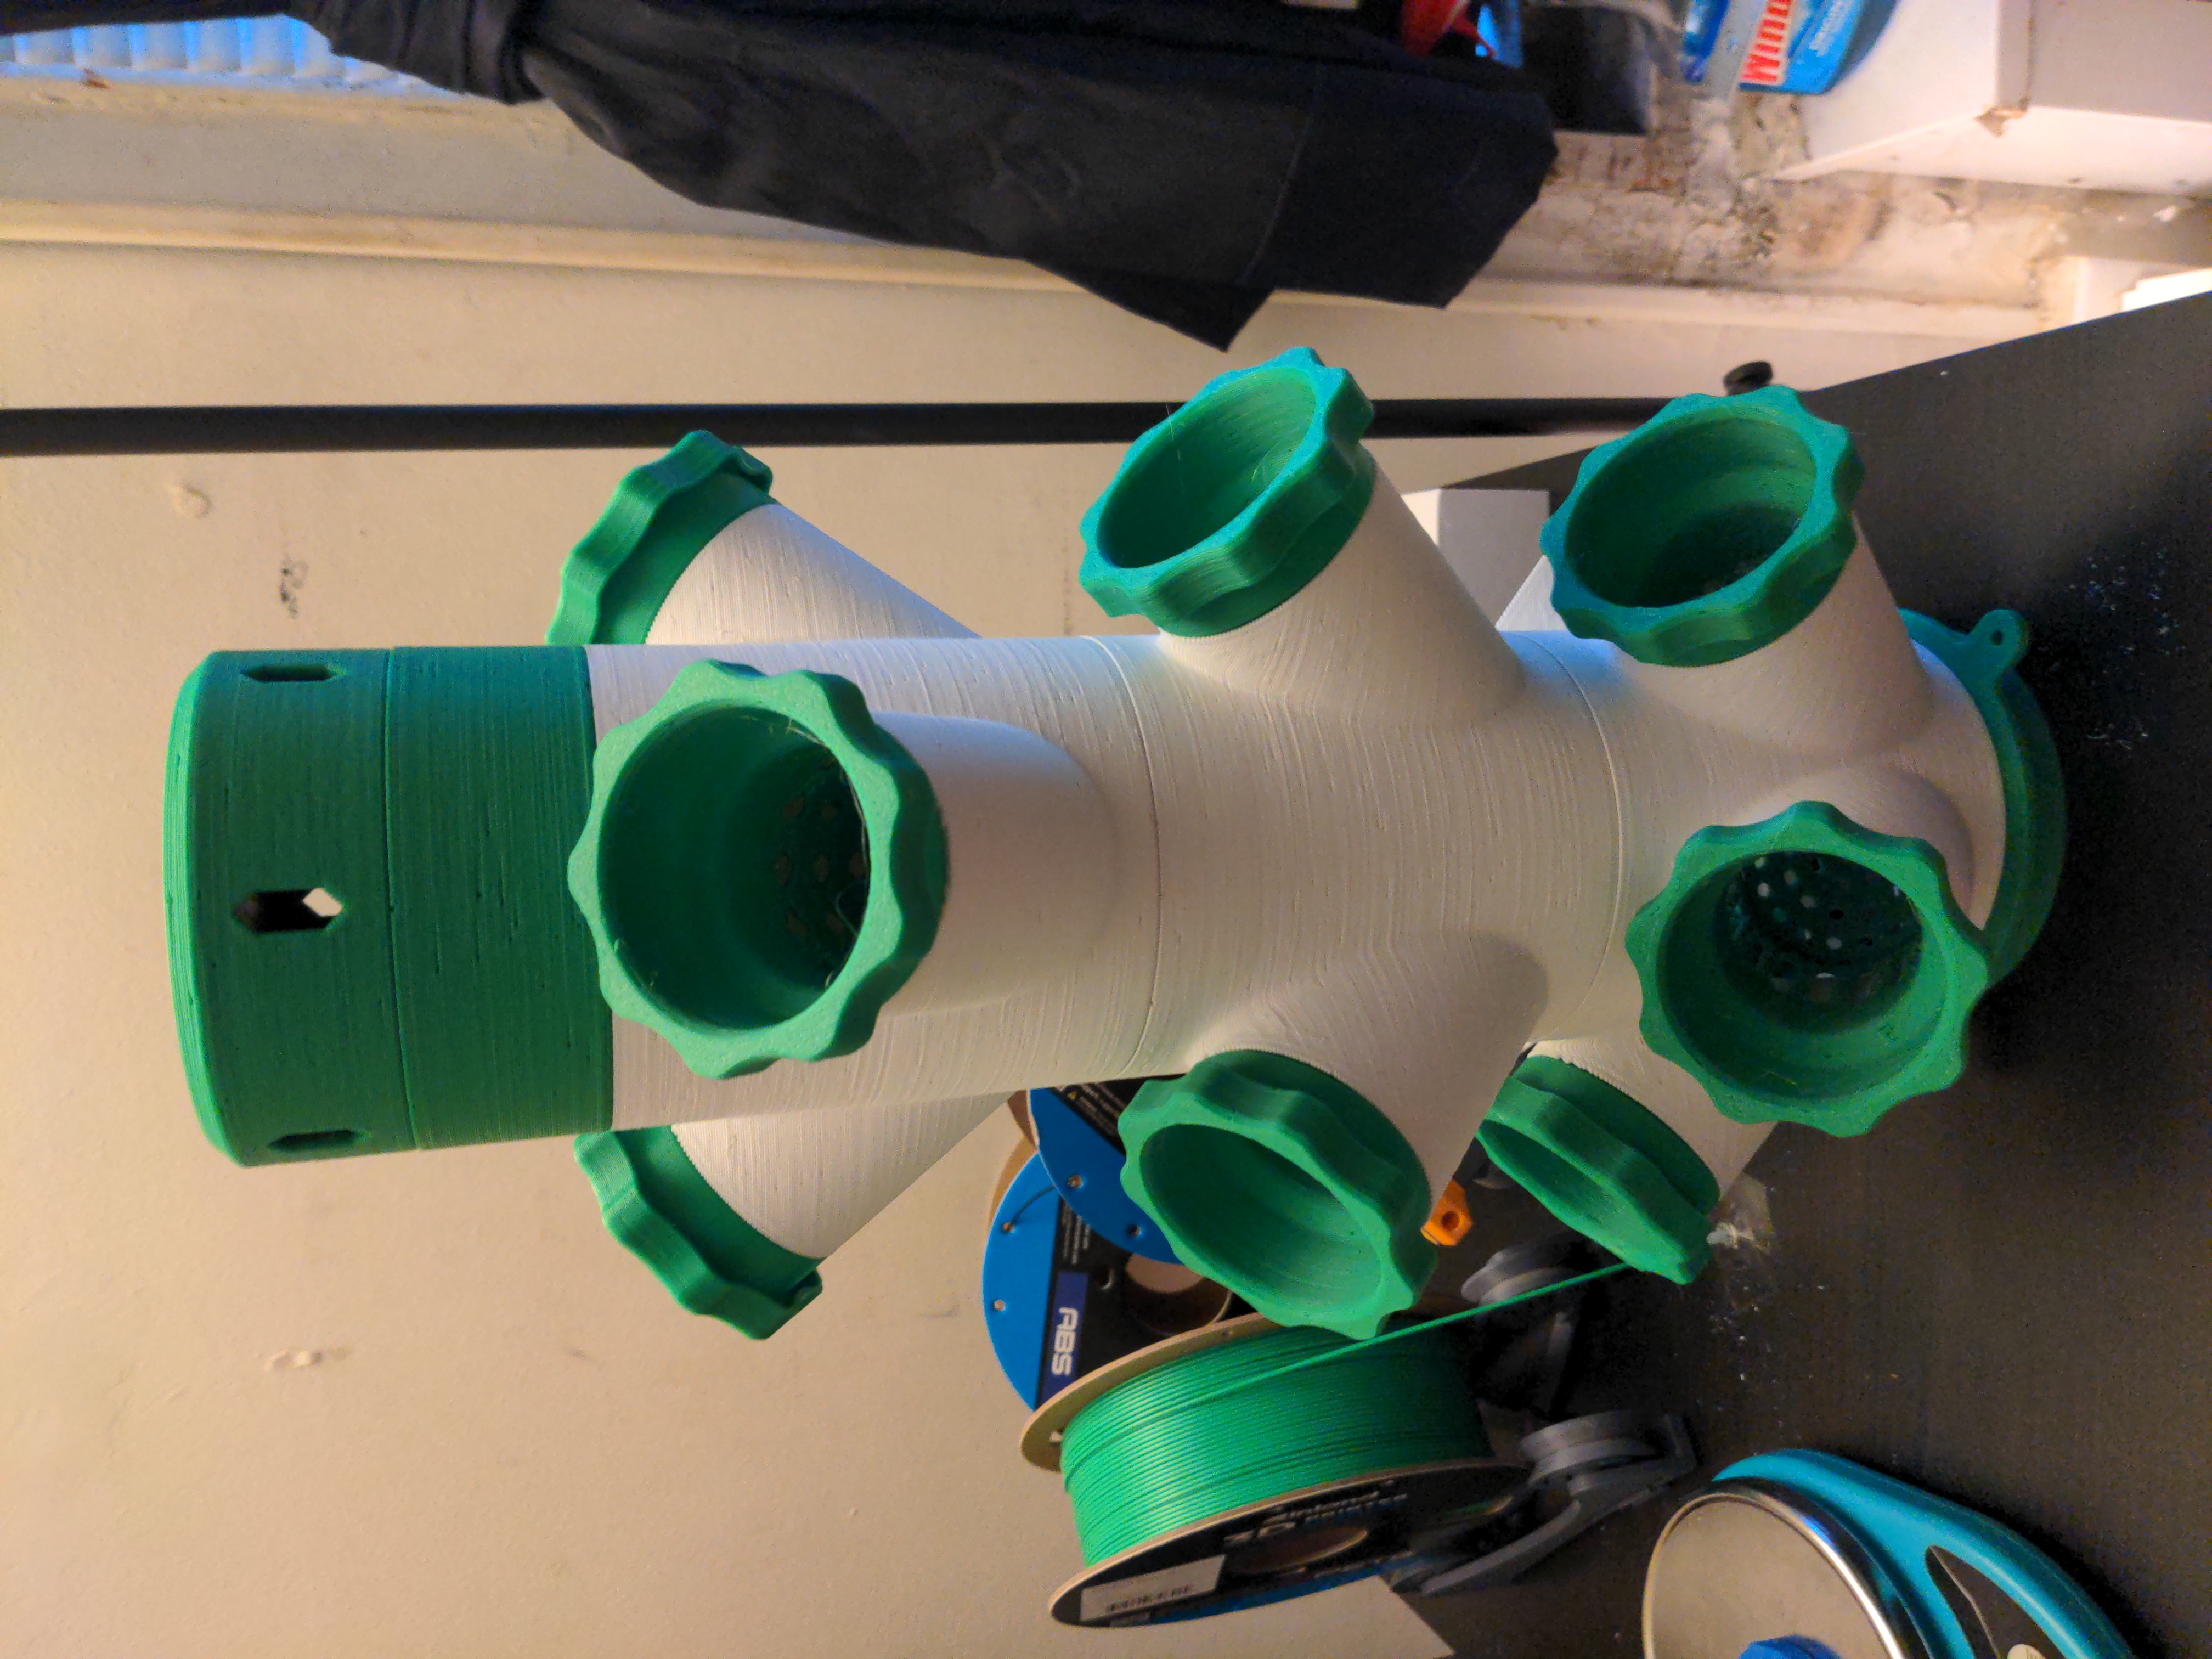 An assembled three story modular hydroponic gardening system, all 3D printed.